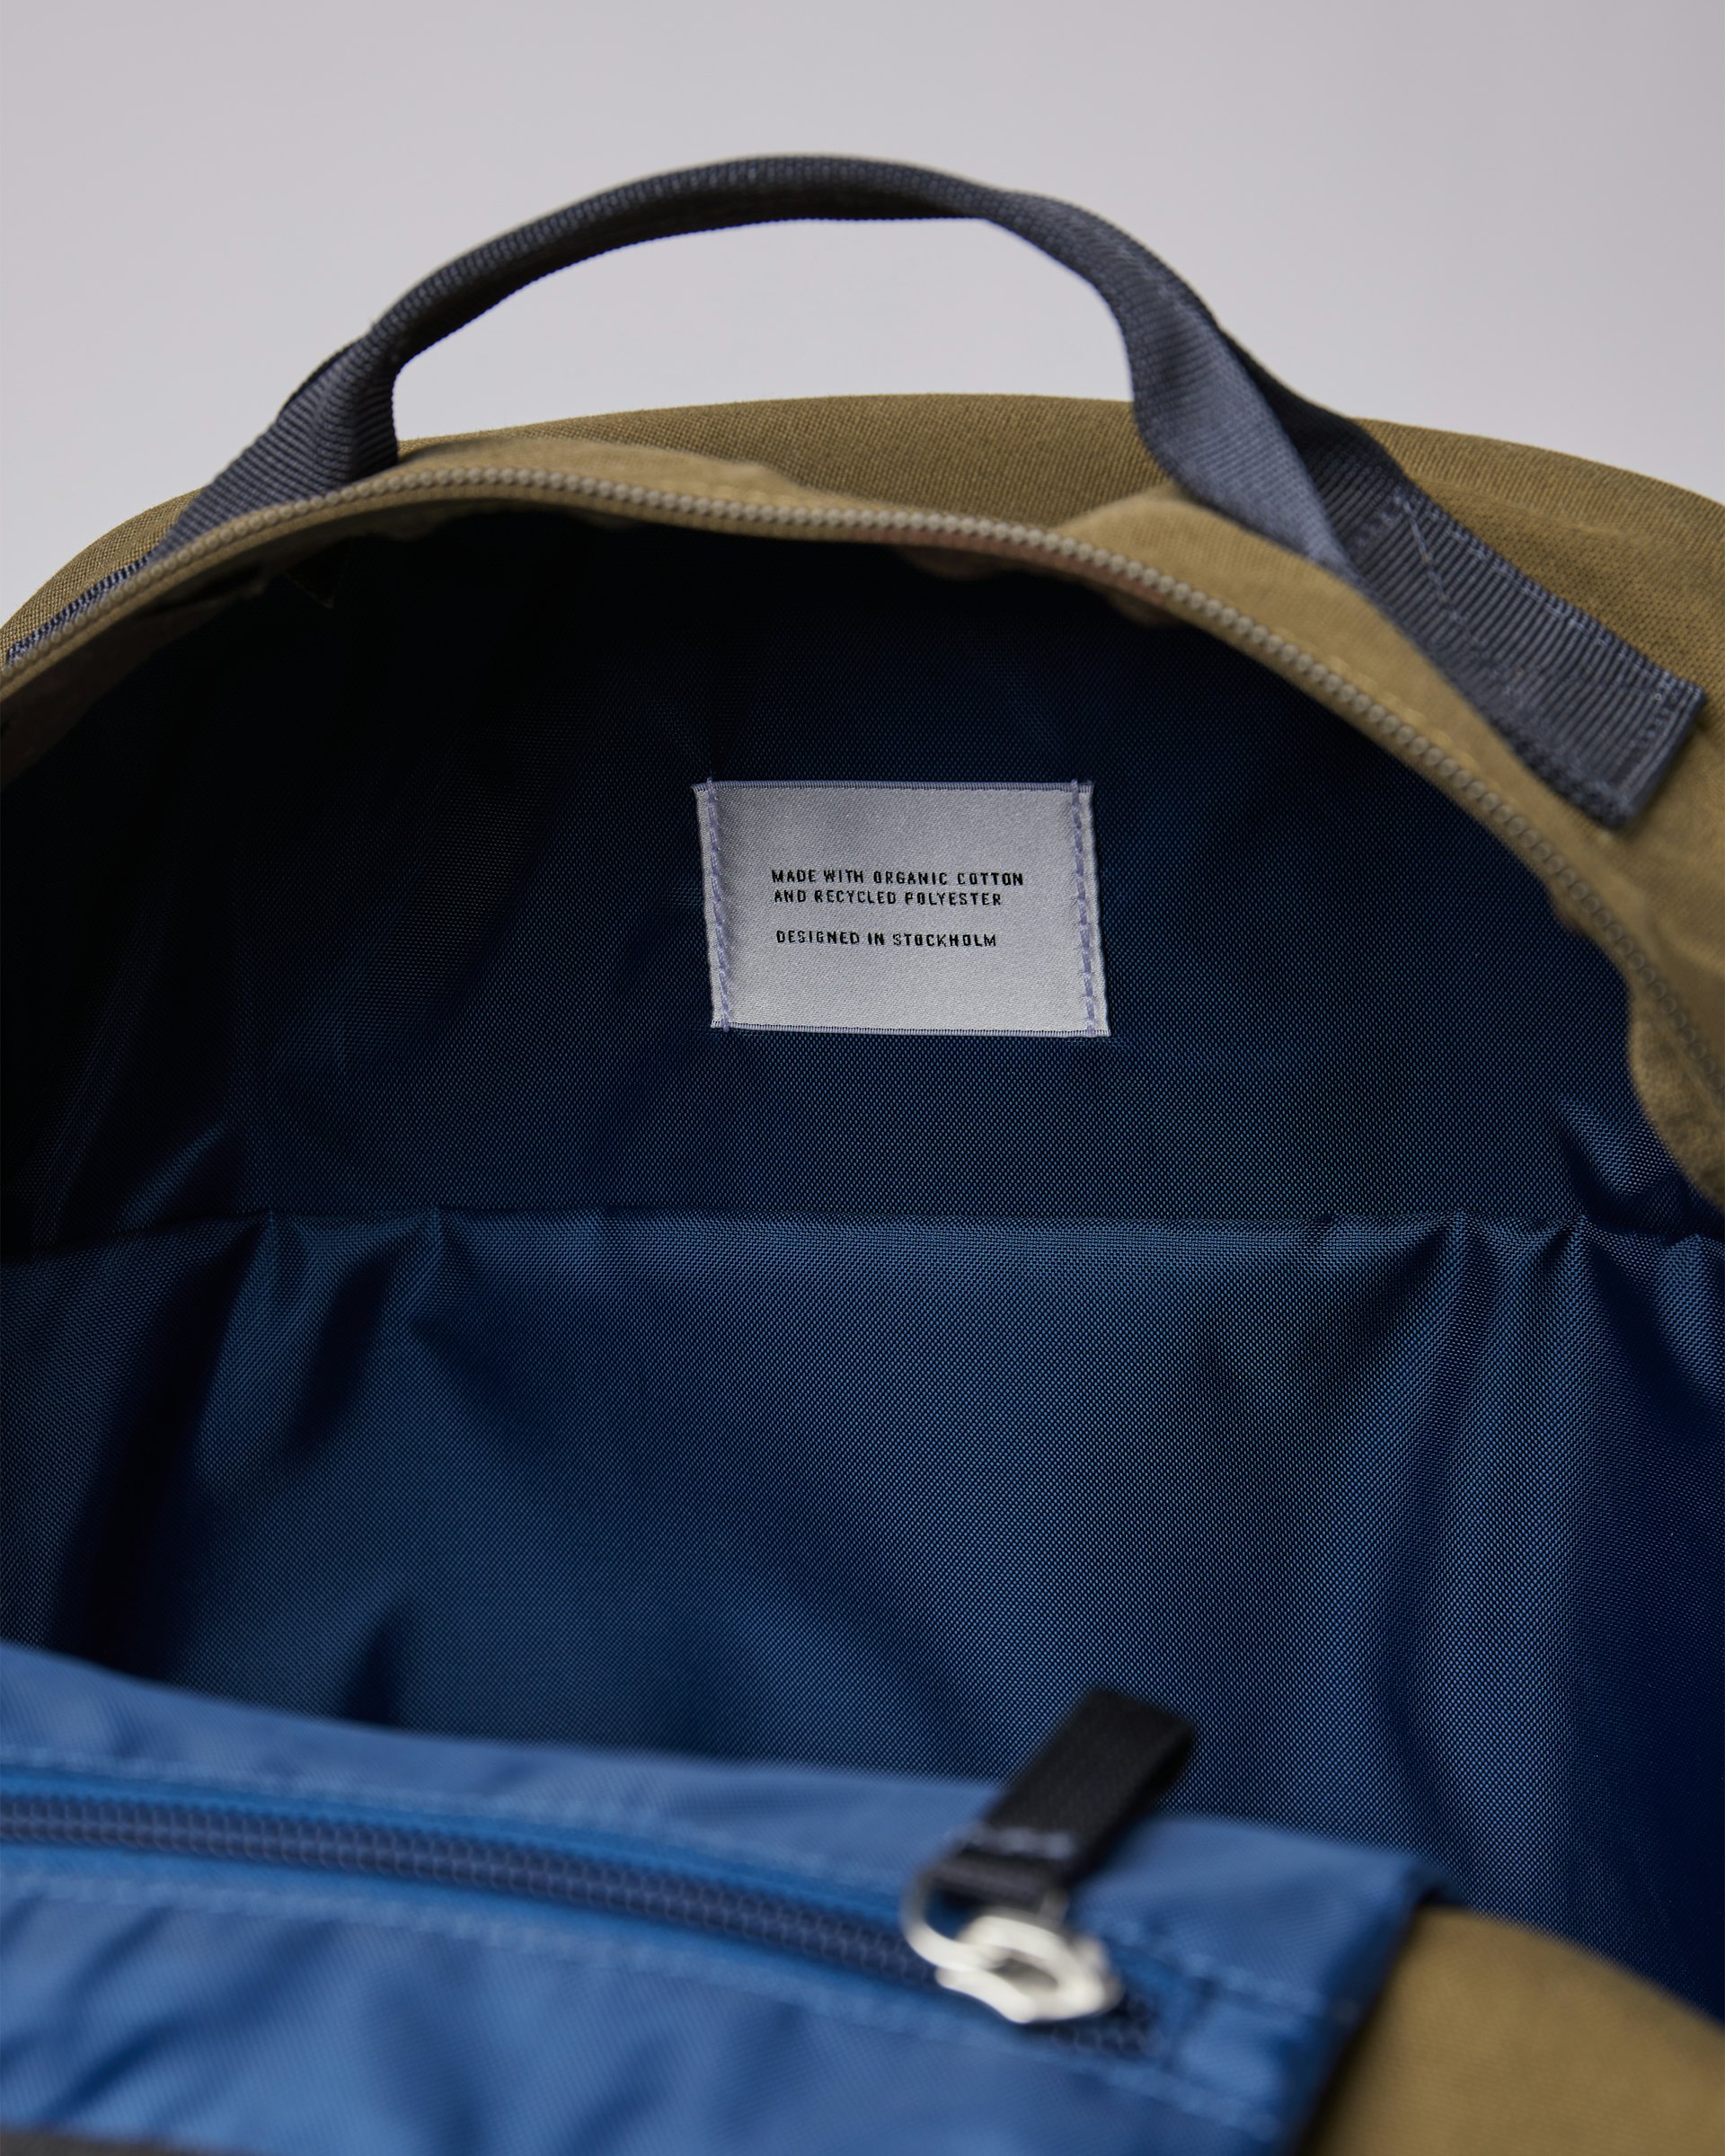 August belongs to the category Backpacks and is in color olive (4 of 4)